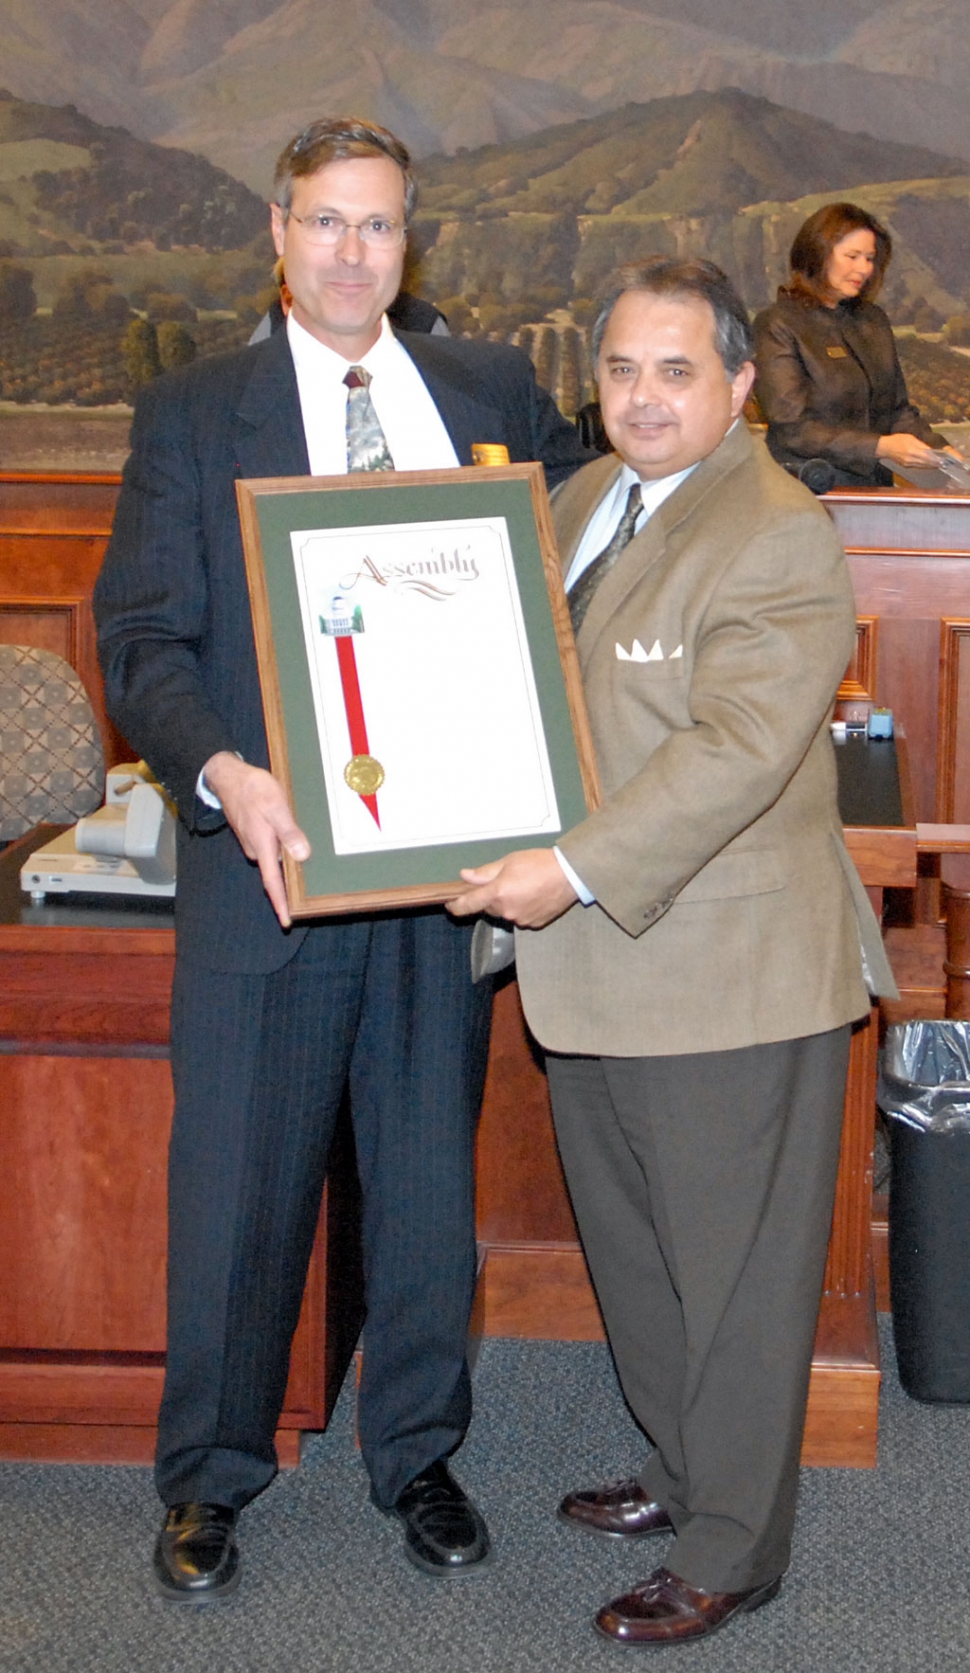 Former Fillmore Mayor Ernie Villegas, right, presents outgoing City Engineer Bert Rapp with a proclamation from our newly elected State Assemblyman, Jeff Gorell, 37th District, honoring Rapp for his nearly 20 years of outstanding work for the City of Fillmore. Villegas complemented and congratulated Rapp as someone he worked with personally during his years as mayor. Rapp received numerous honors from state, county, and local
establishments, each acknowledging the quality of his work and his personal integrity. He received several standing ovations as well.